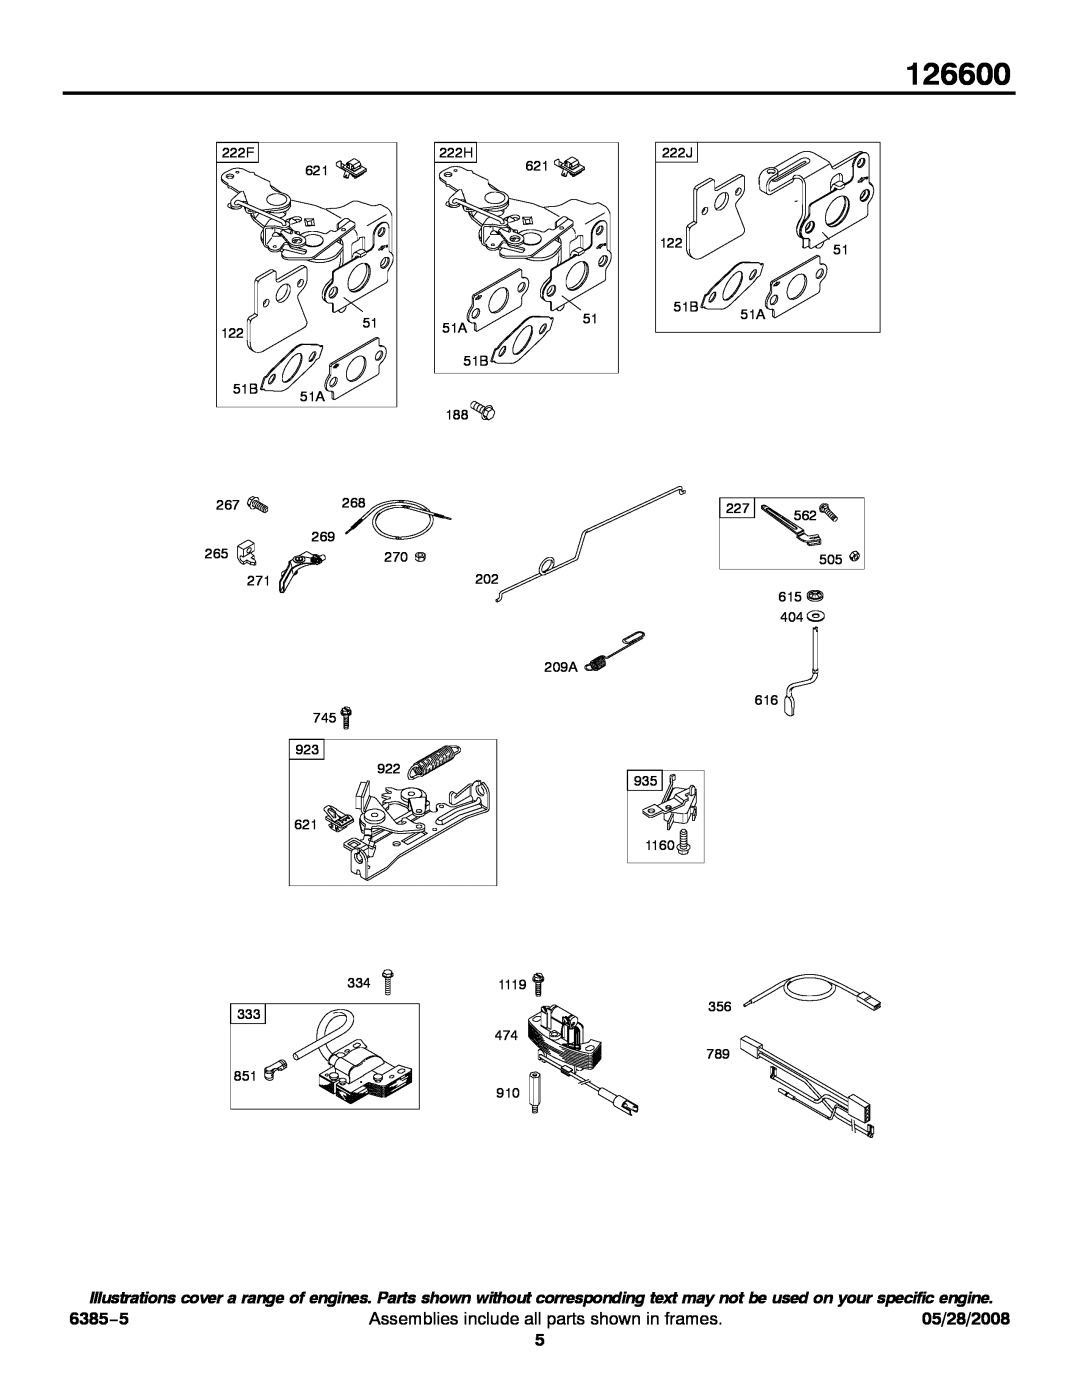 Briggs & Stratton 126600 service manual 6385−5, Assemblies include all parts shown in frames, 05/28/2008 